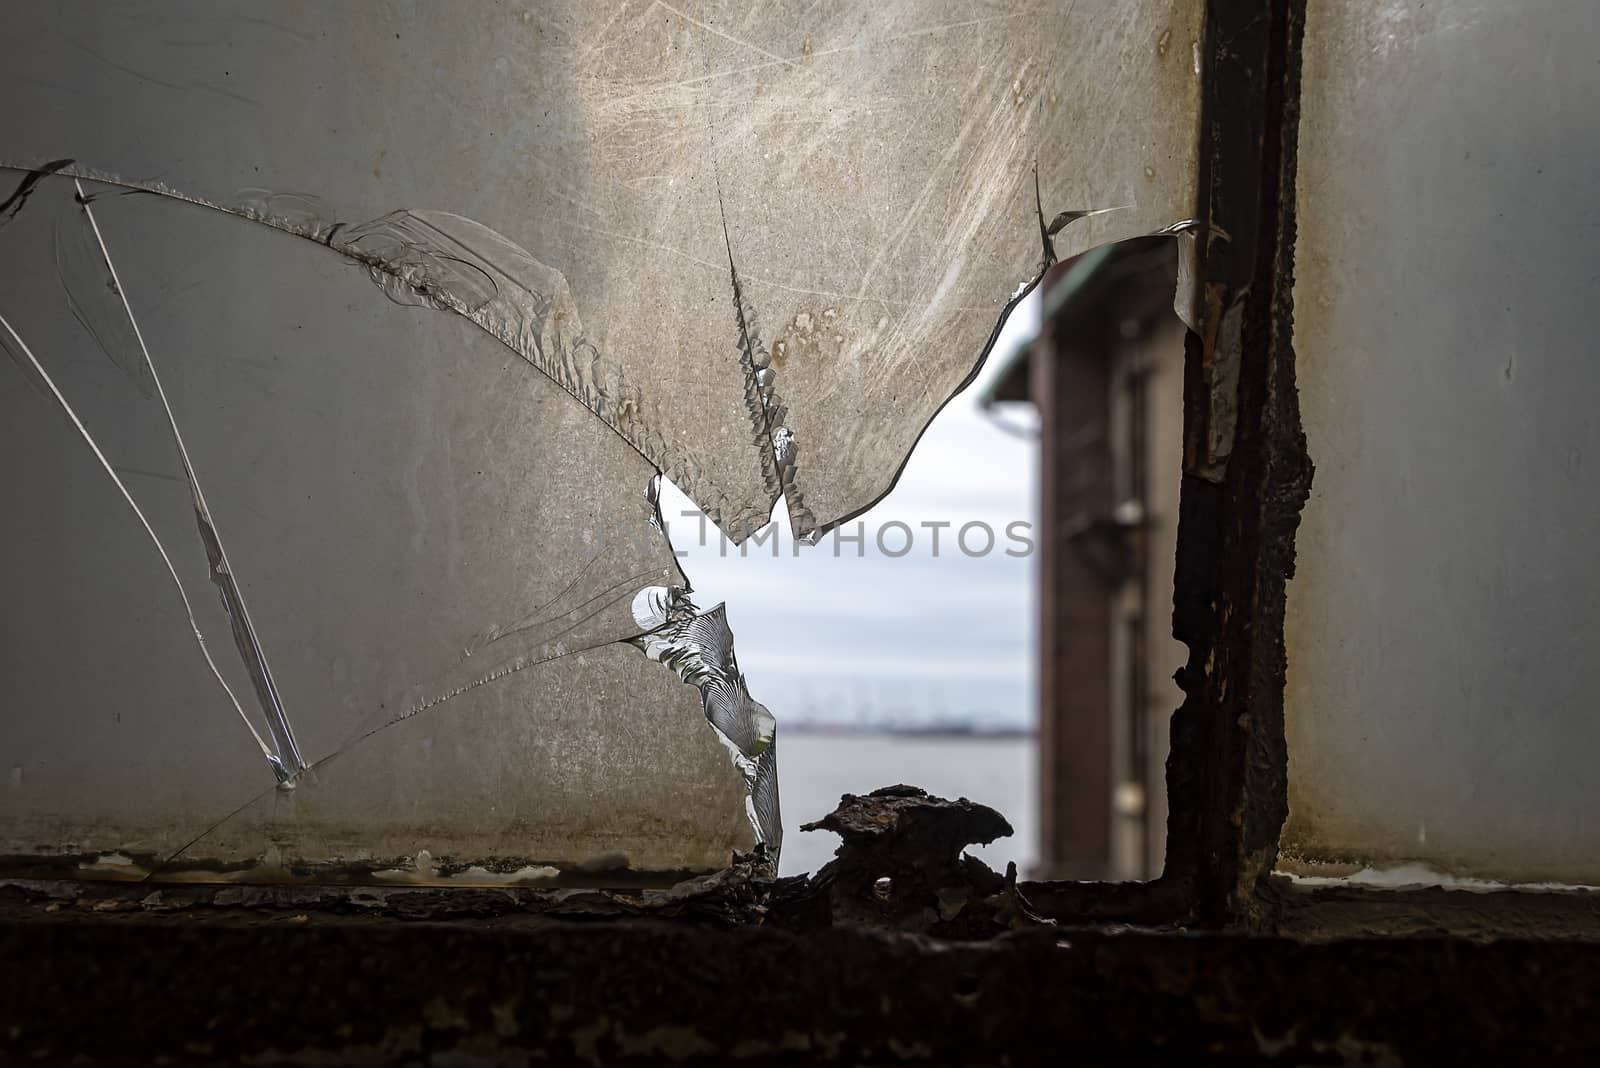 USA, New York, Ellis Island - May 2019: Small view of the beach though a broken glass pane in a rusty window casing